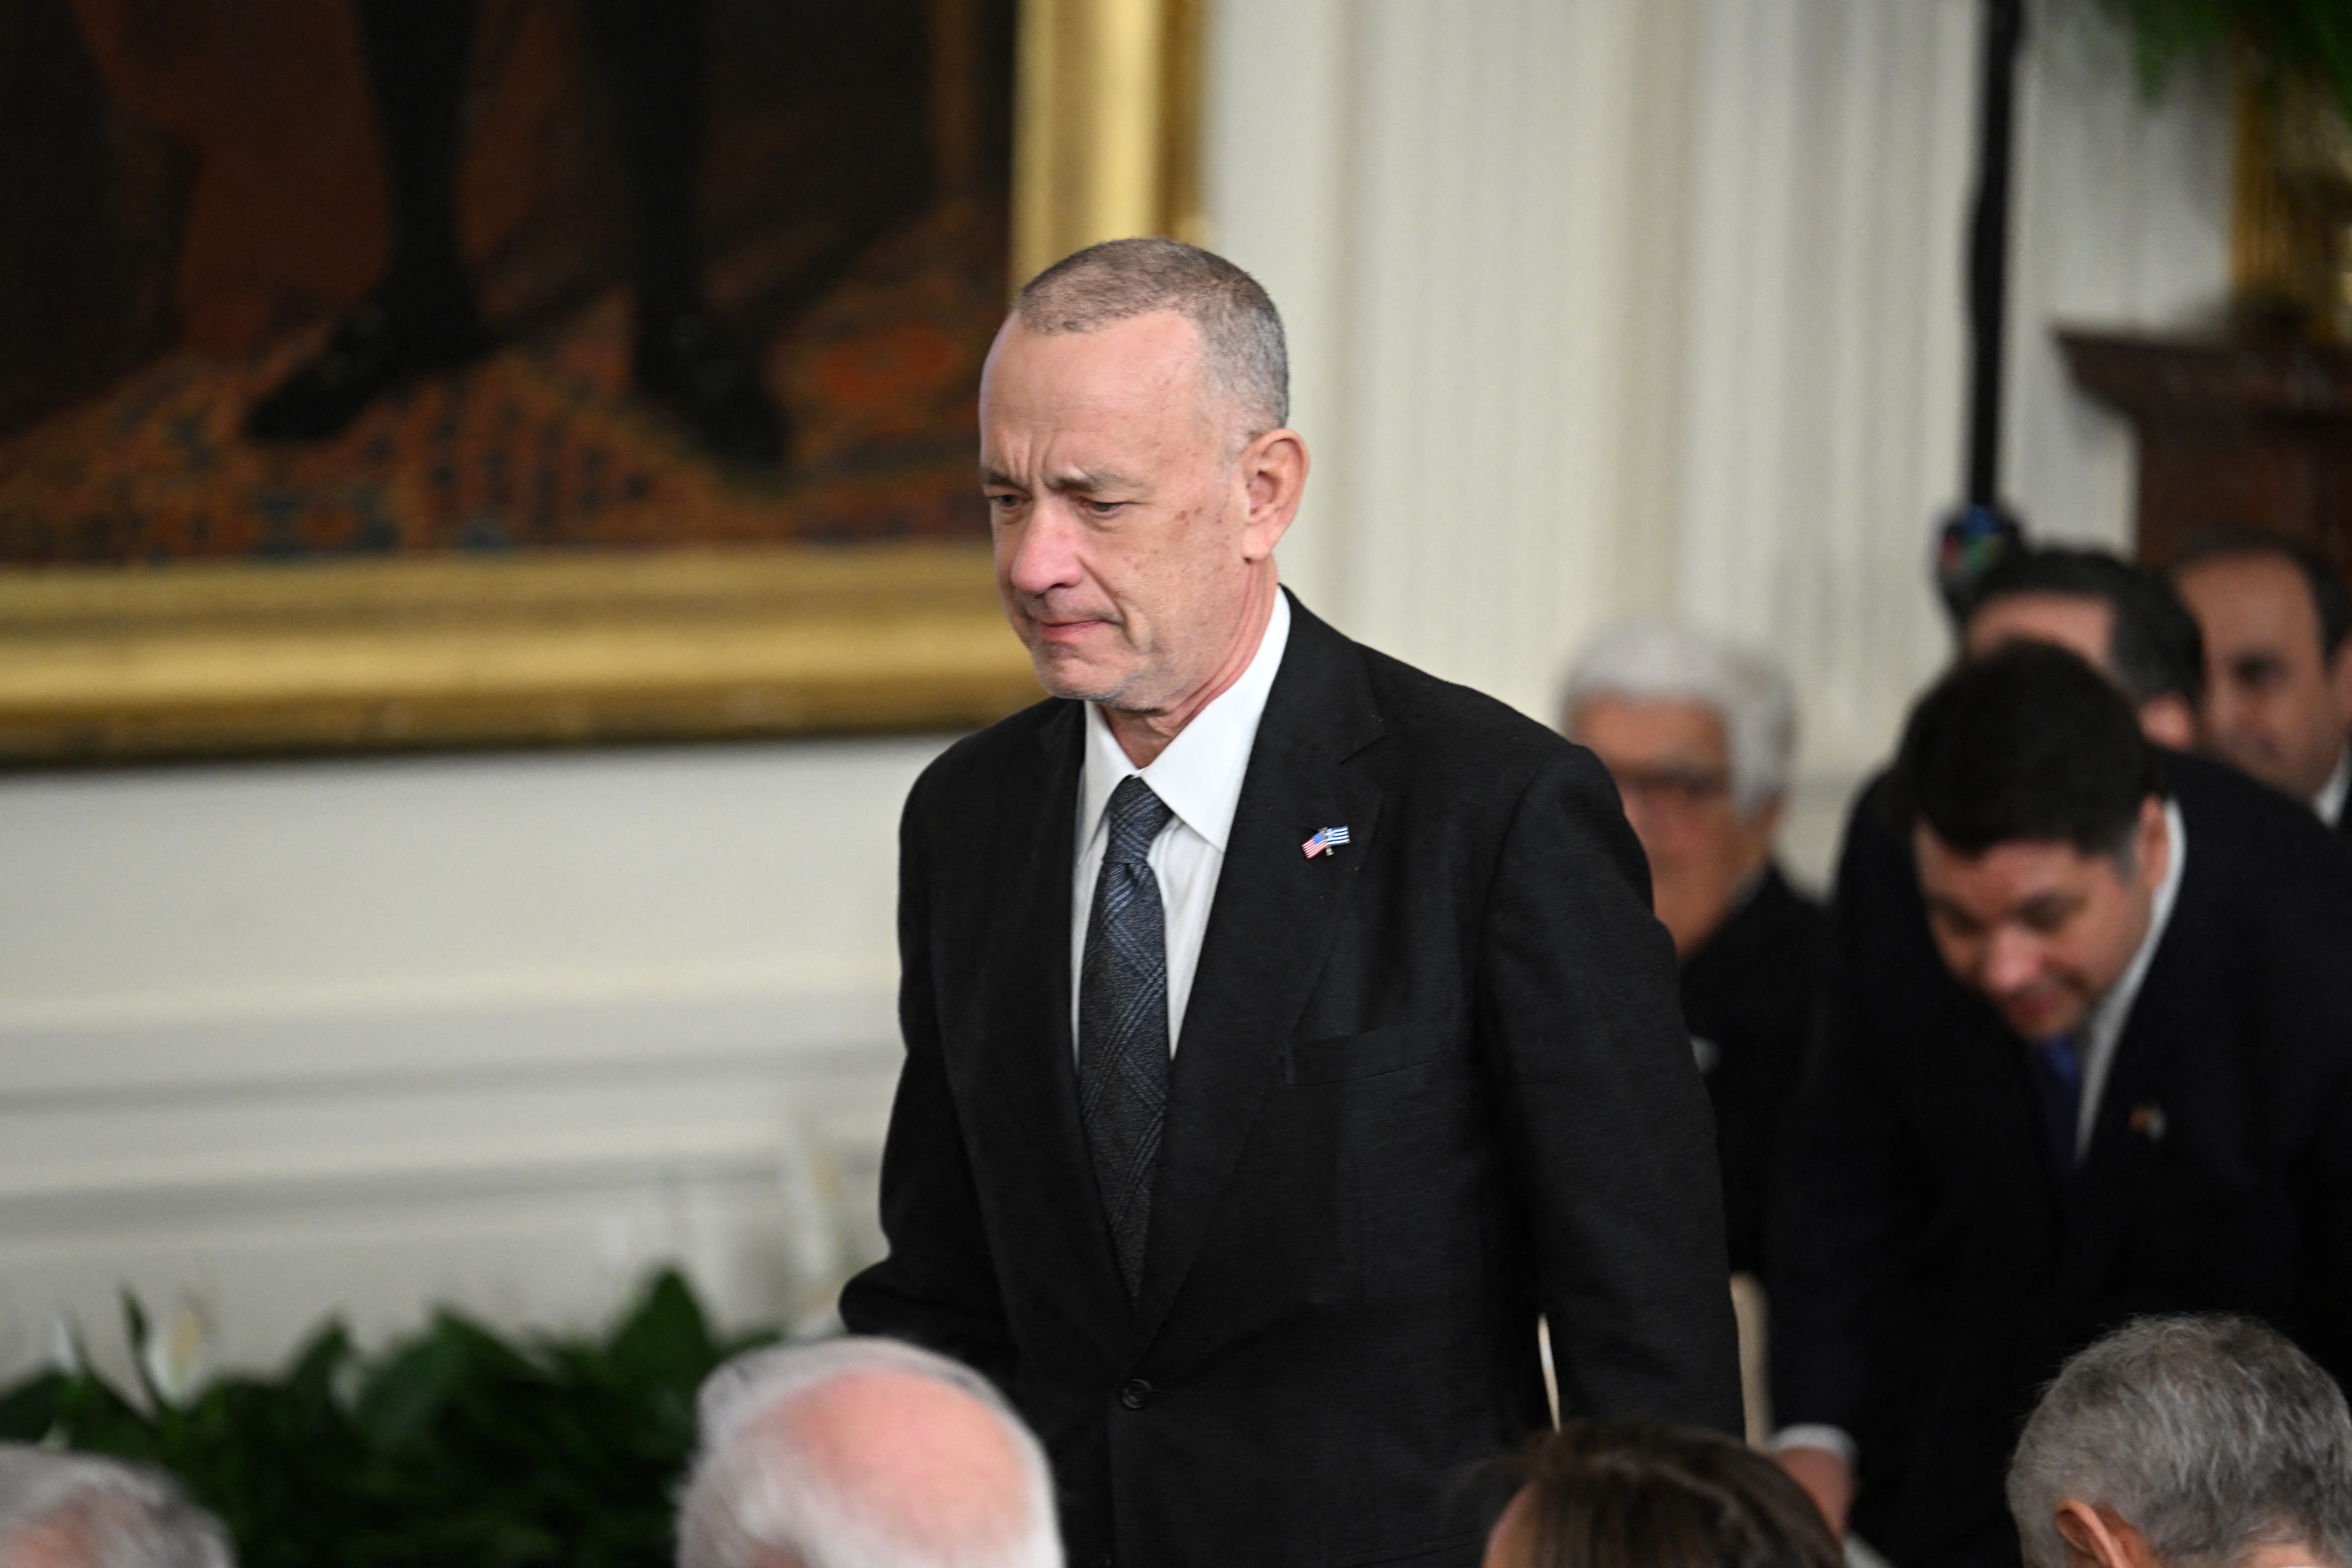 Tom Hanks at a reception celebrating Greek Independence Day at the White House in Washington, DC, on March 29, 2023 | Source: Getty Images